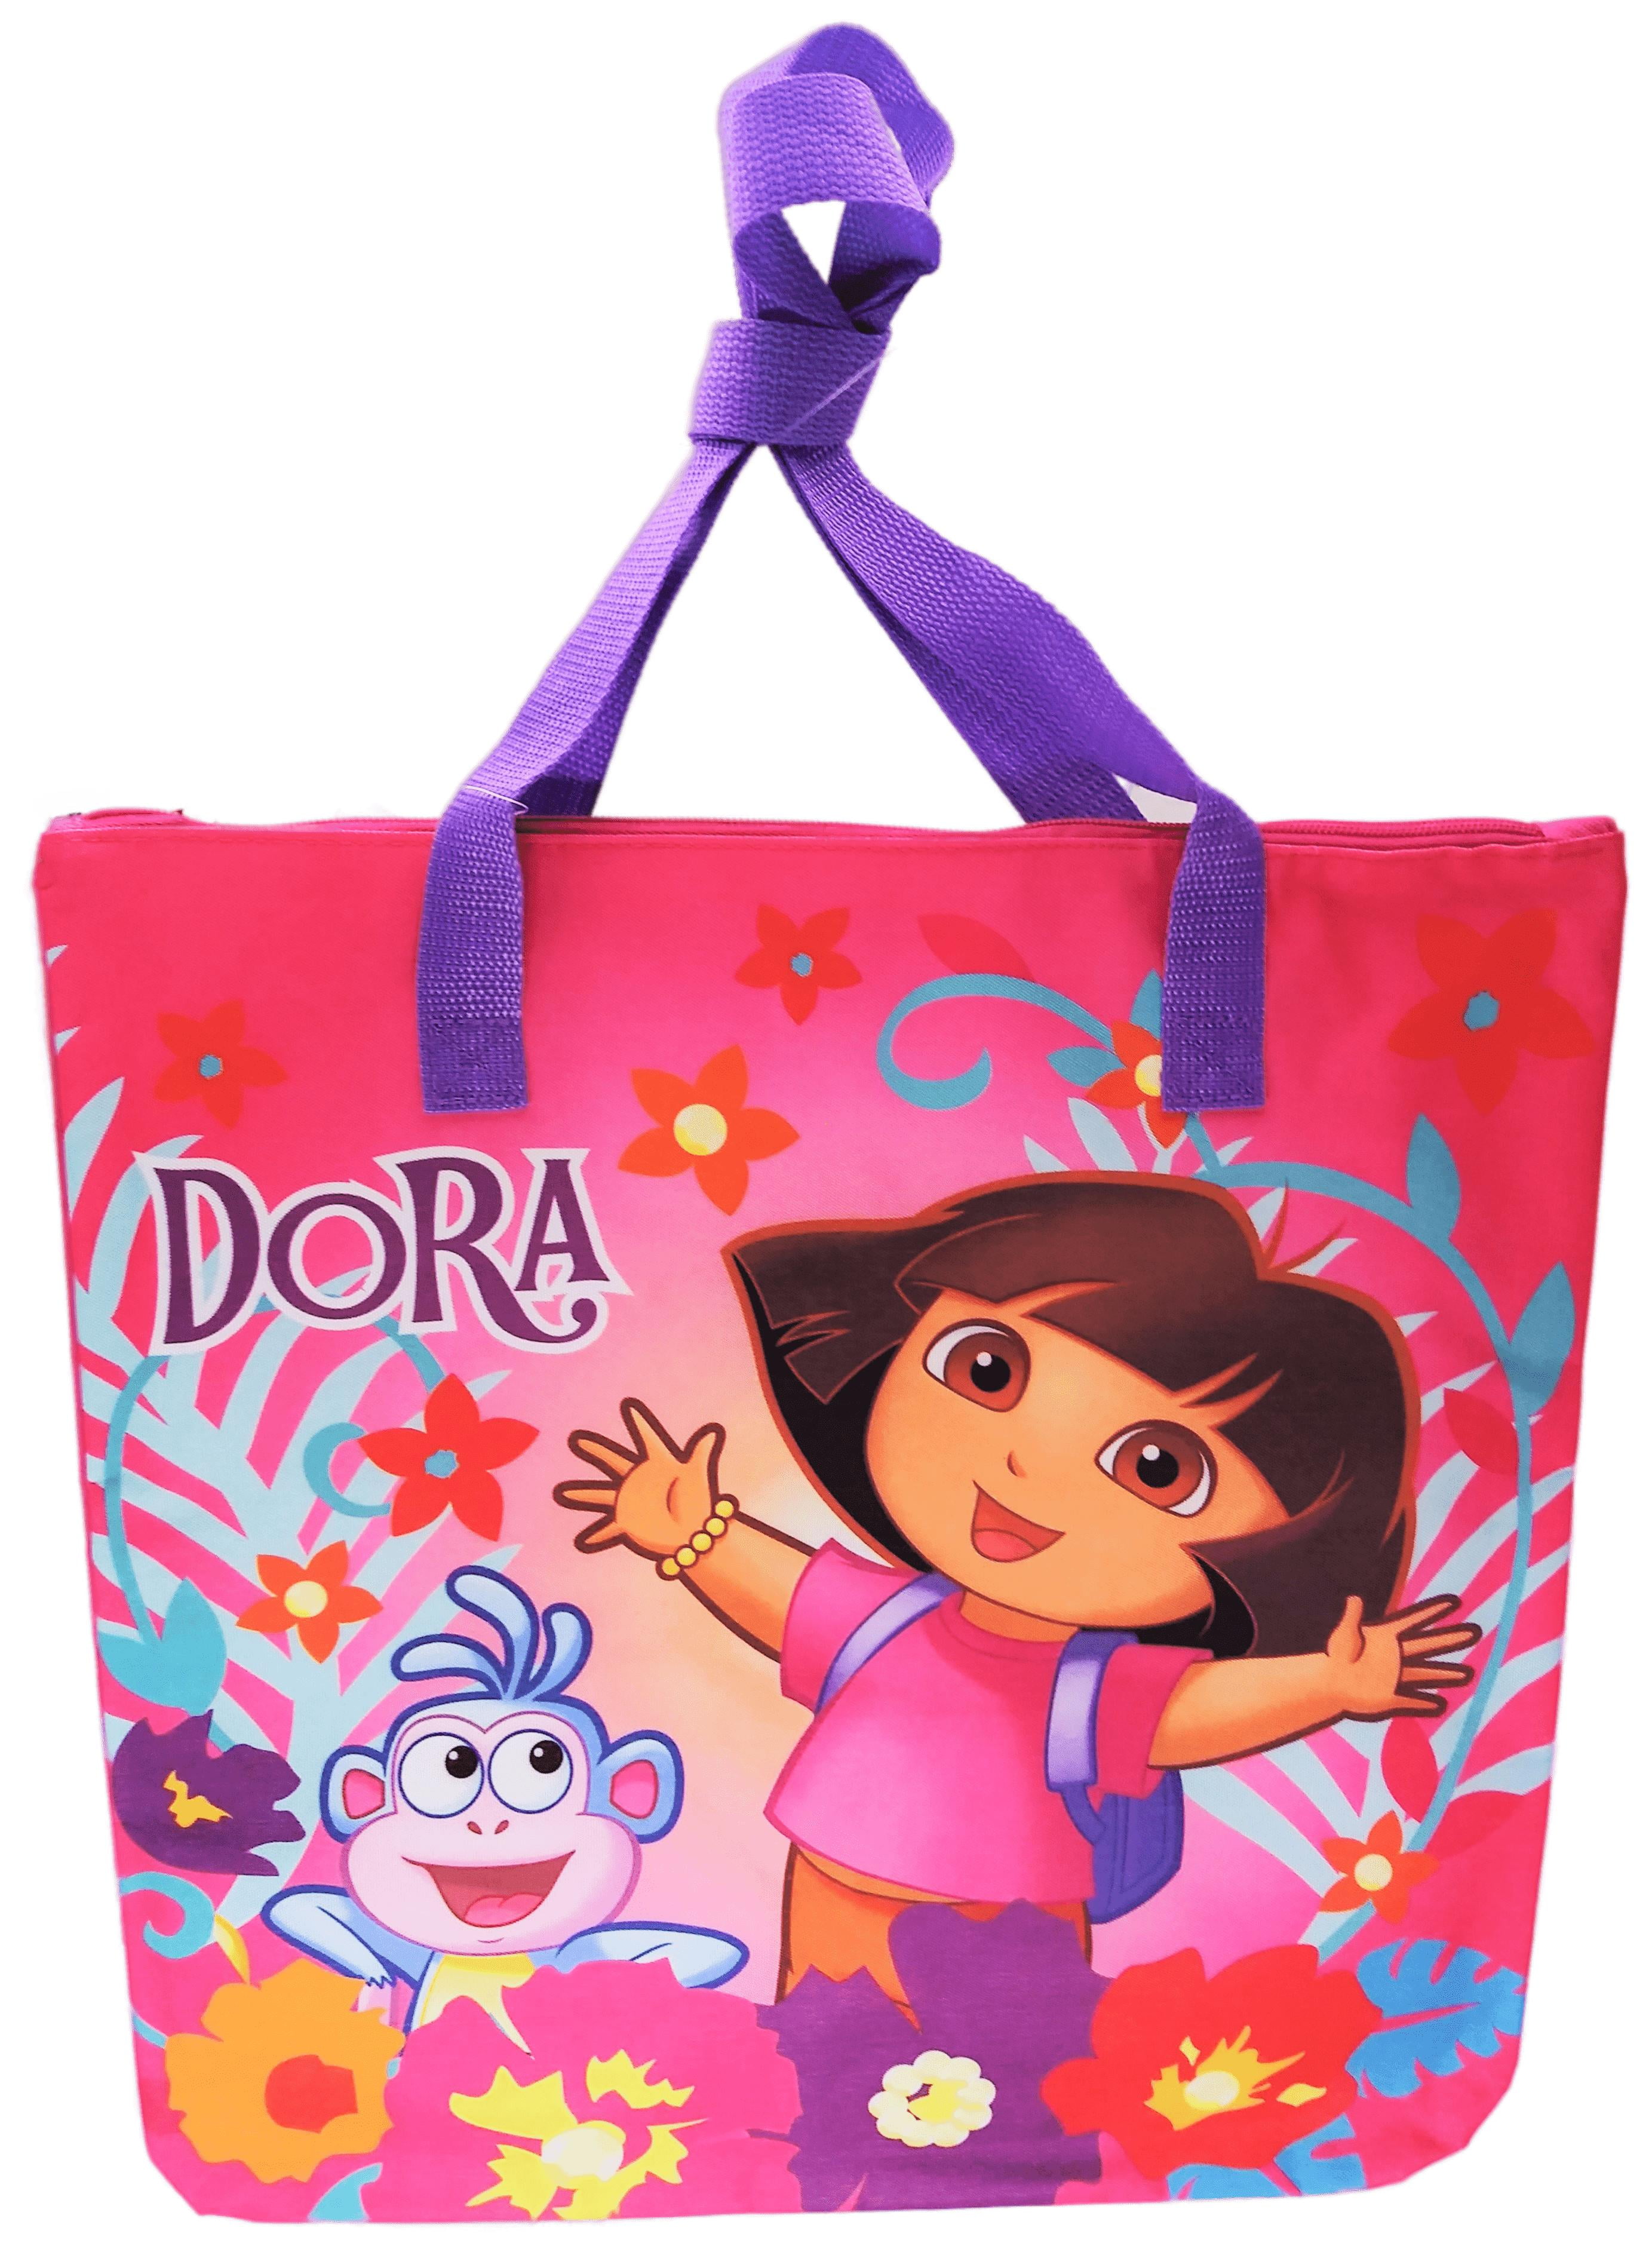 NEW DORA THE EXPLORER WALLET COIN PURSE WITH MULTIPLE SLOTS | eBay